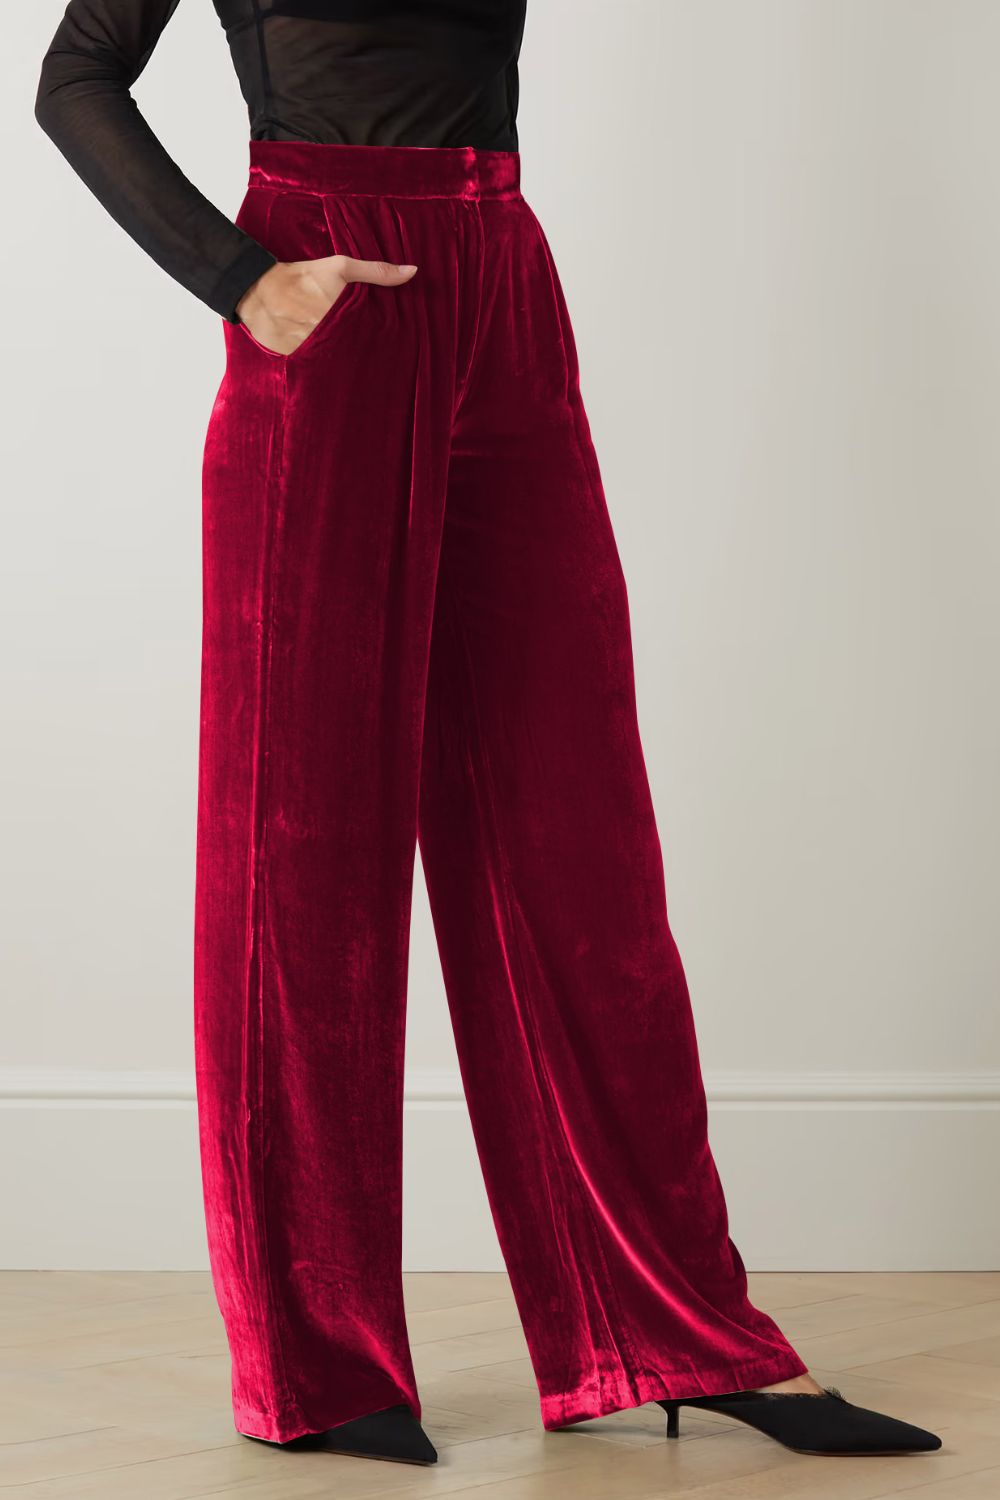 Double Take Loose Fit High Waist Long Pants with Pockets | CLOTHING,SHOES & ACCESSORIES | Double Take, pants, Ship From Overseas, Shipping Delay 09/29/2023 - 10/02/2023, Women's Apparel, women's clothing, women's fashion | Trendsi